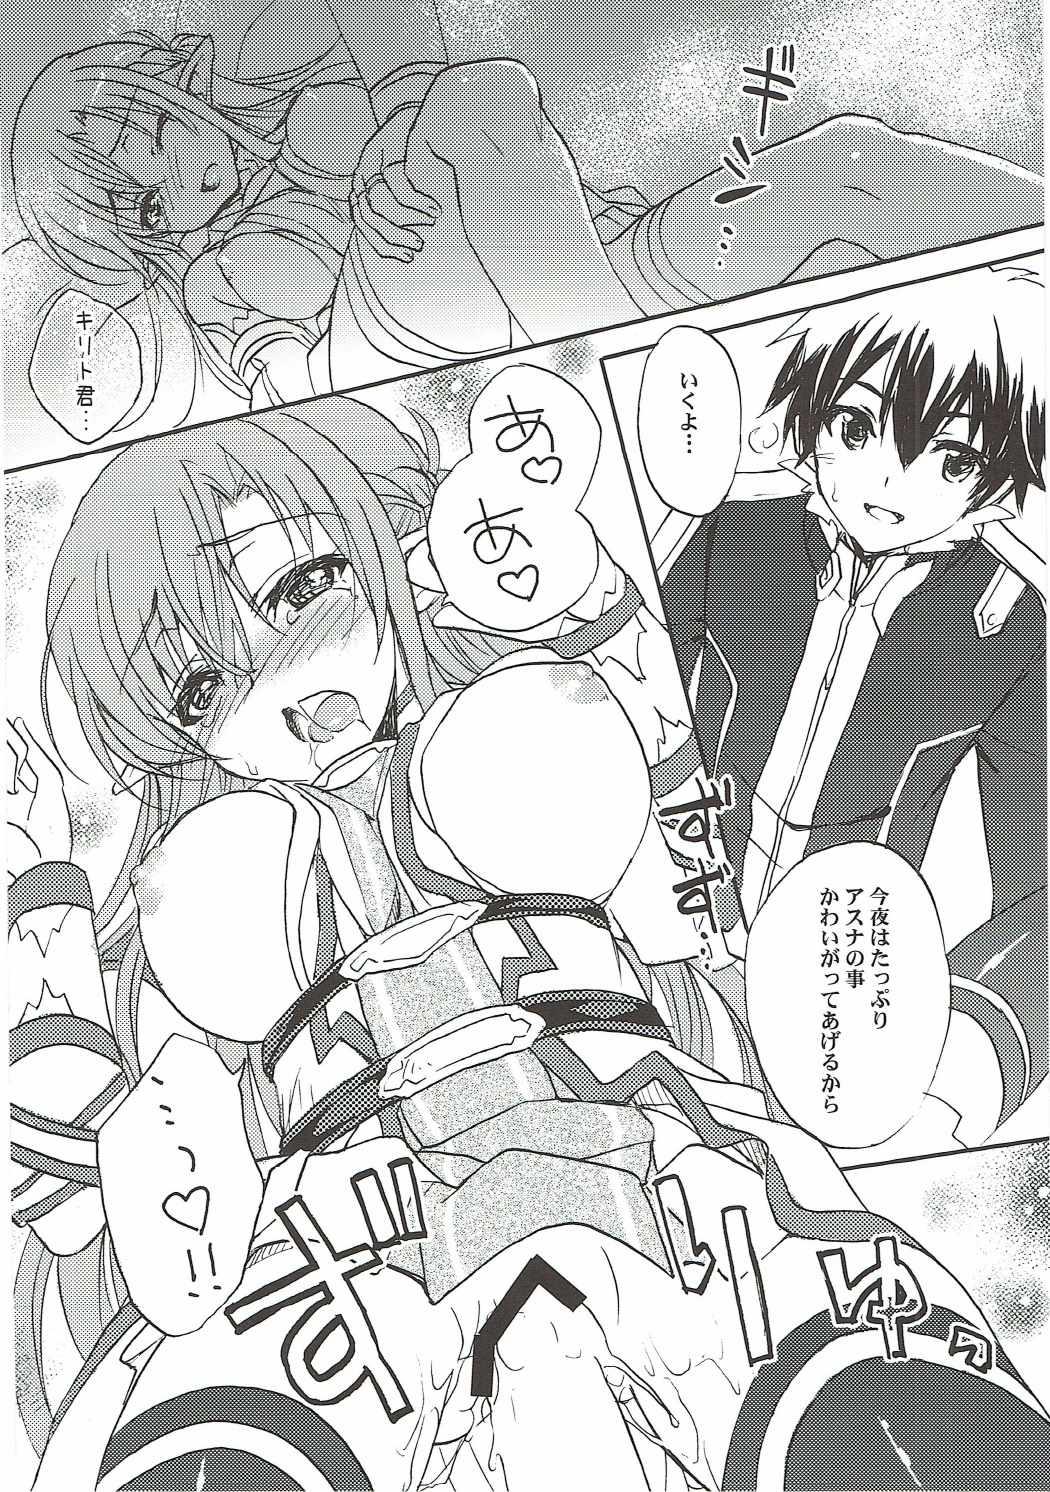 Bubble Home Sweet Home 2 - Sword art online Que - Page 11